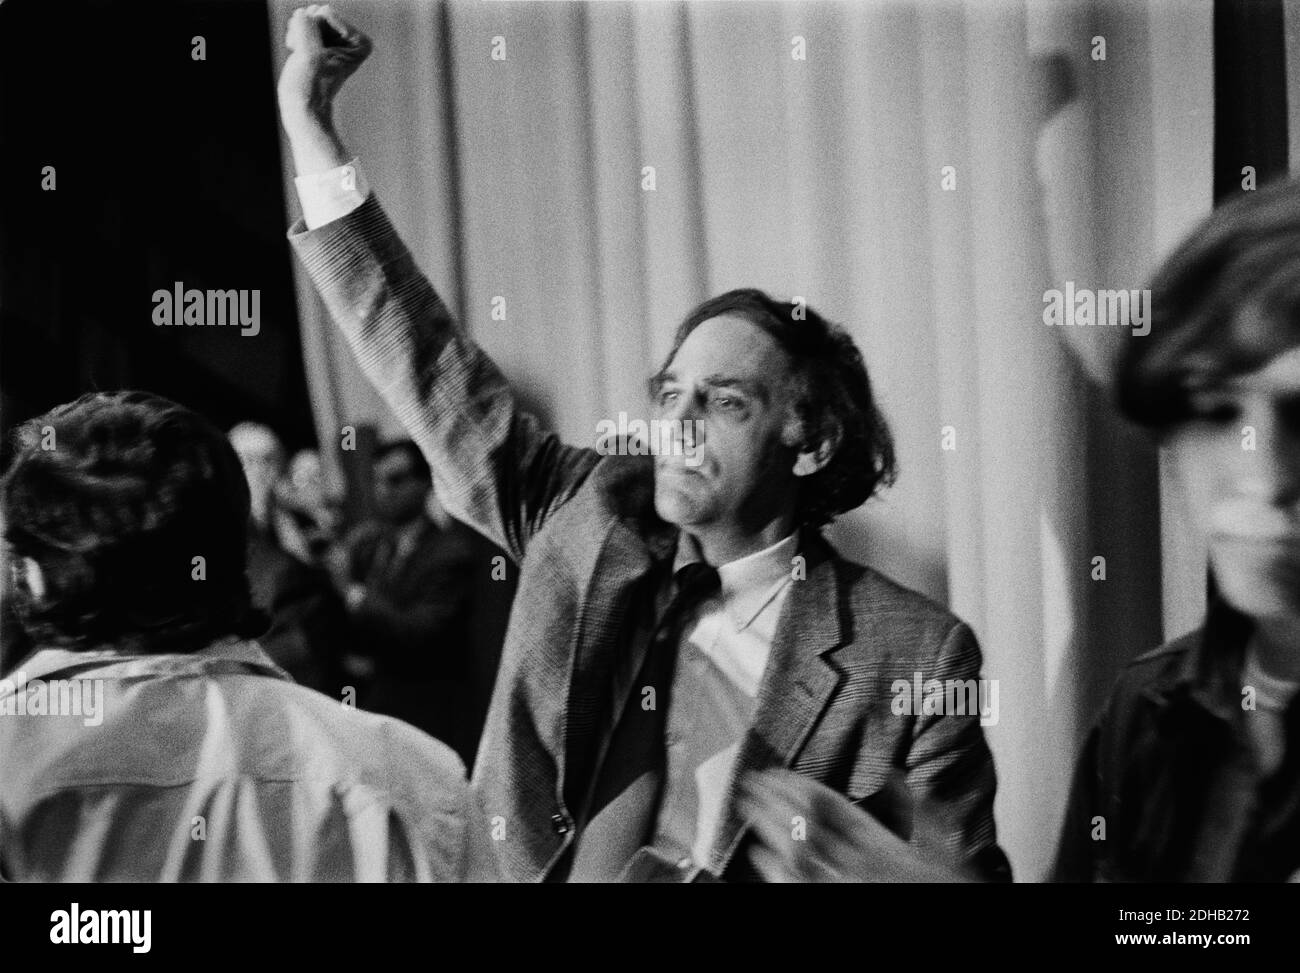 Attorney William Kunstler speaks at the University of Cincinnati in 1969. William Moses Kunstler was an American lawyer and civil rights activist, known for defending the Chicago 7. Kunstler was an active member of the National Lawyers Guild, a board member of the American Civil Liberties Union (ACLU) and the co-founder of the Law Center for Constitutional Rights, the 'leading gathering place for radical lawyers in the country.'  Kunstler's defense of the Chicago Seven from 1969 to 1970 led The New York Times to label him 'the country's most controversial and, perhaps, its best-known lawyer'. Stock Photo